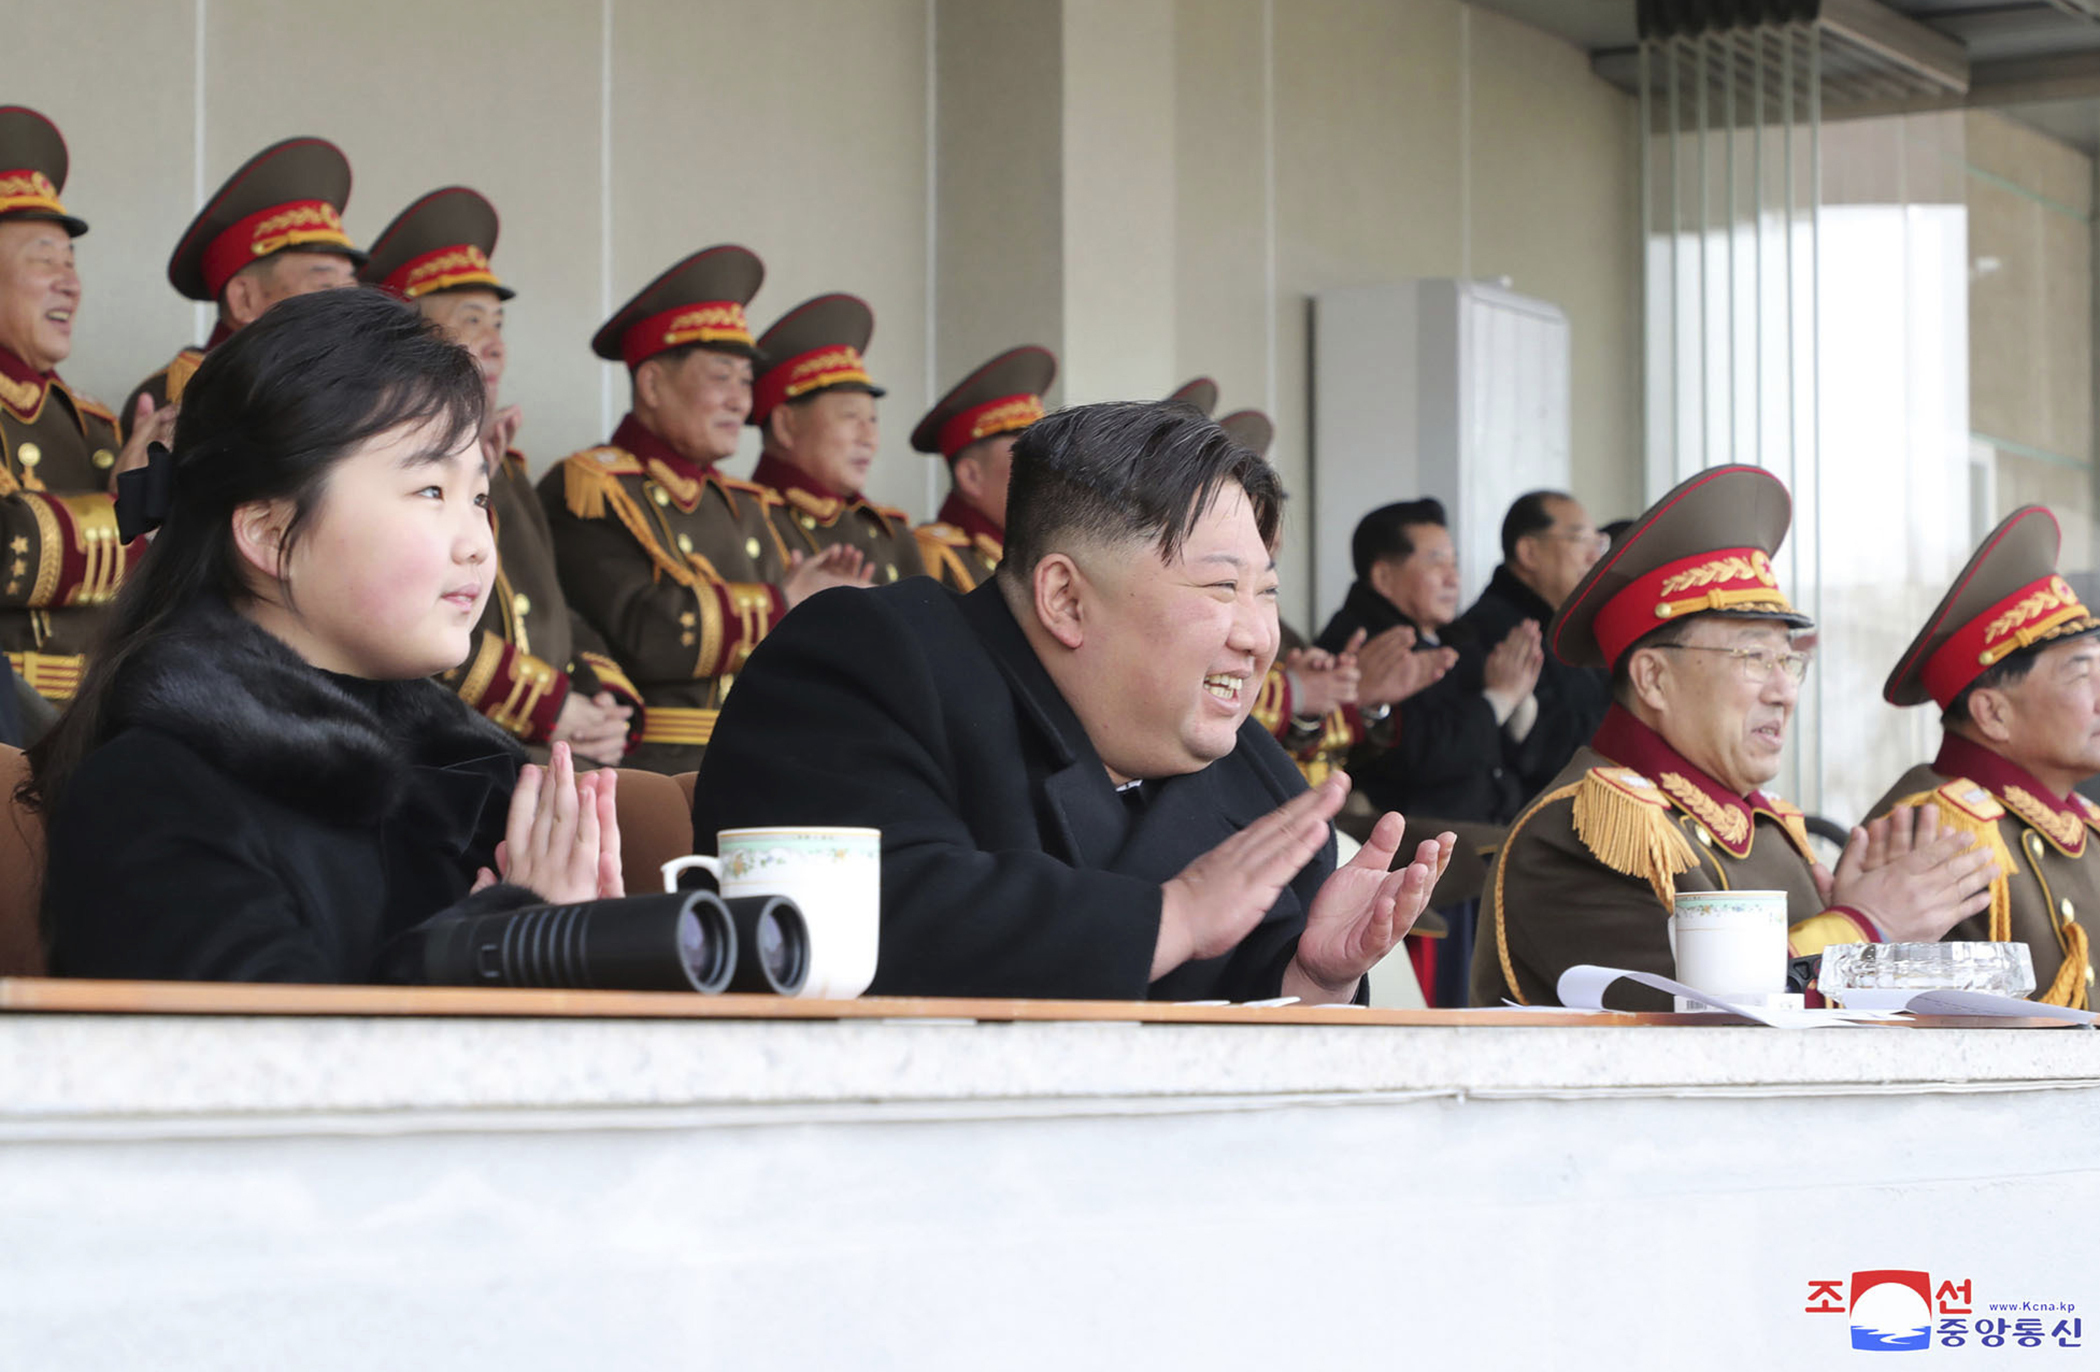 This photo released by the North Korean regime shows the country's leader Kim Jong Un (center) and his daughter (left) in a sports competition with members of the government and the Ministry of National Defense, at a location not revealed in North Korea on February 17, 2023. (Korea Central News Agency/Korea News Service via AP)